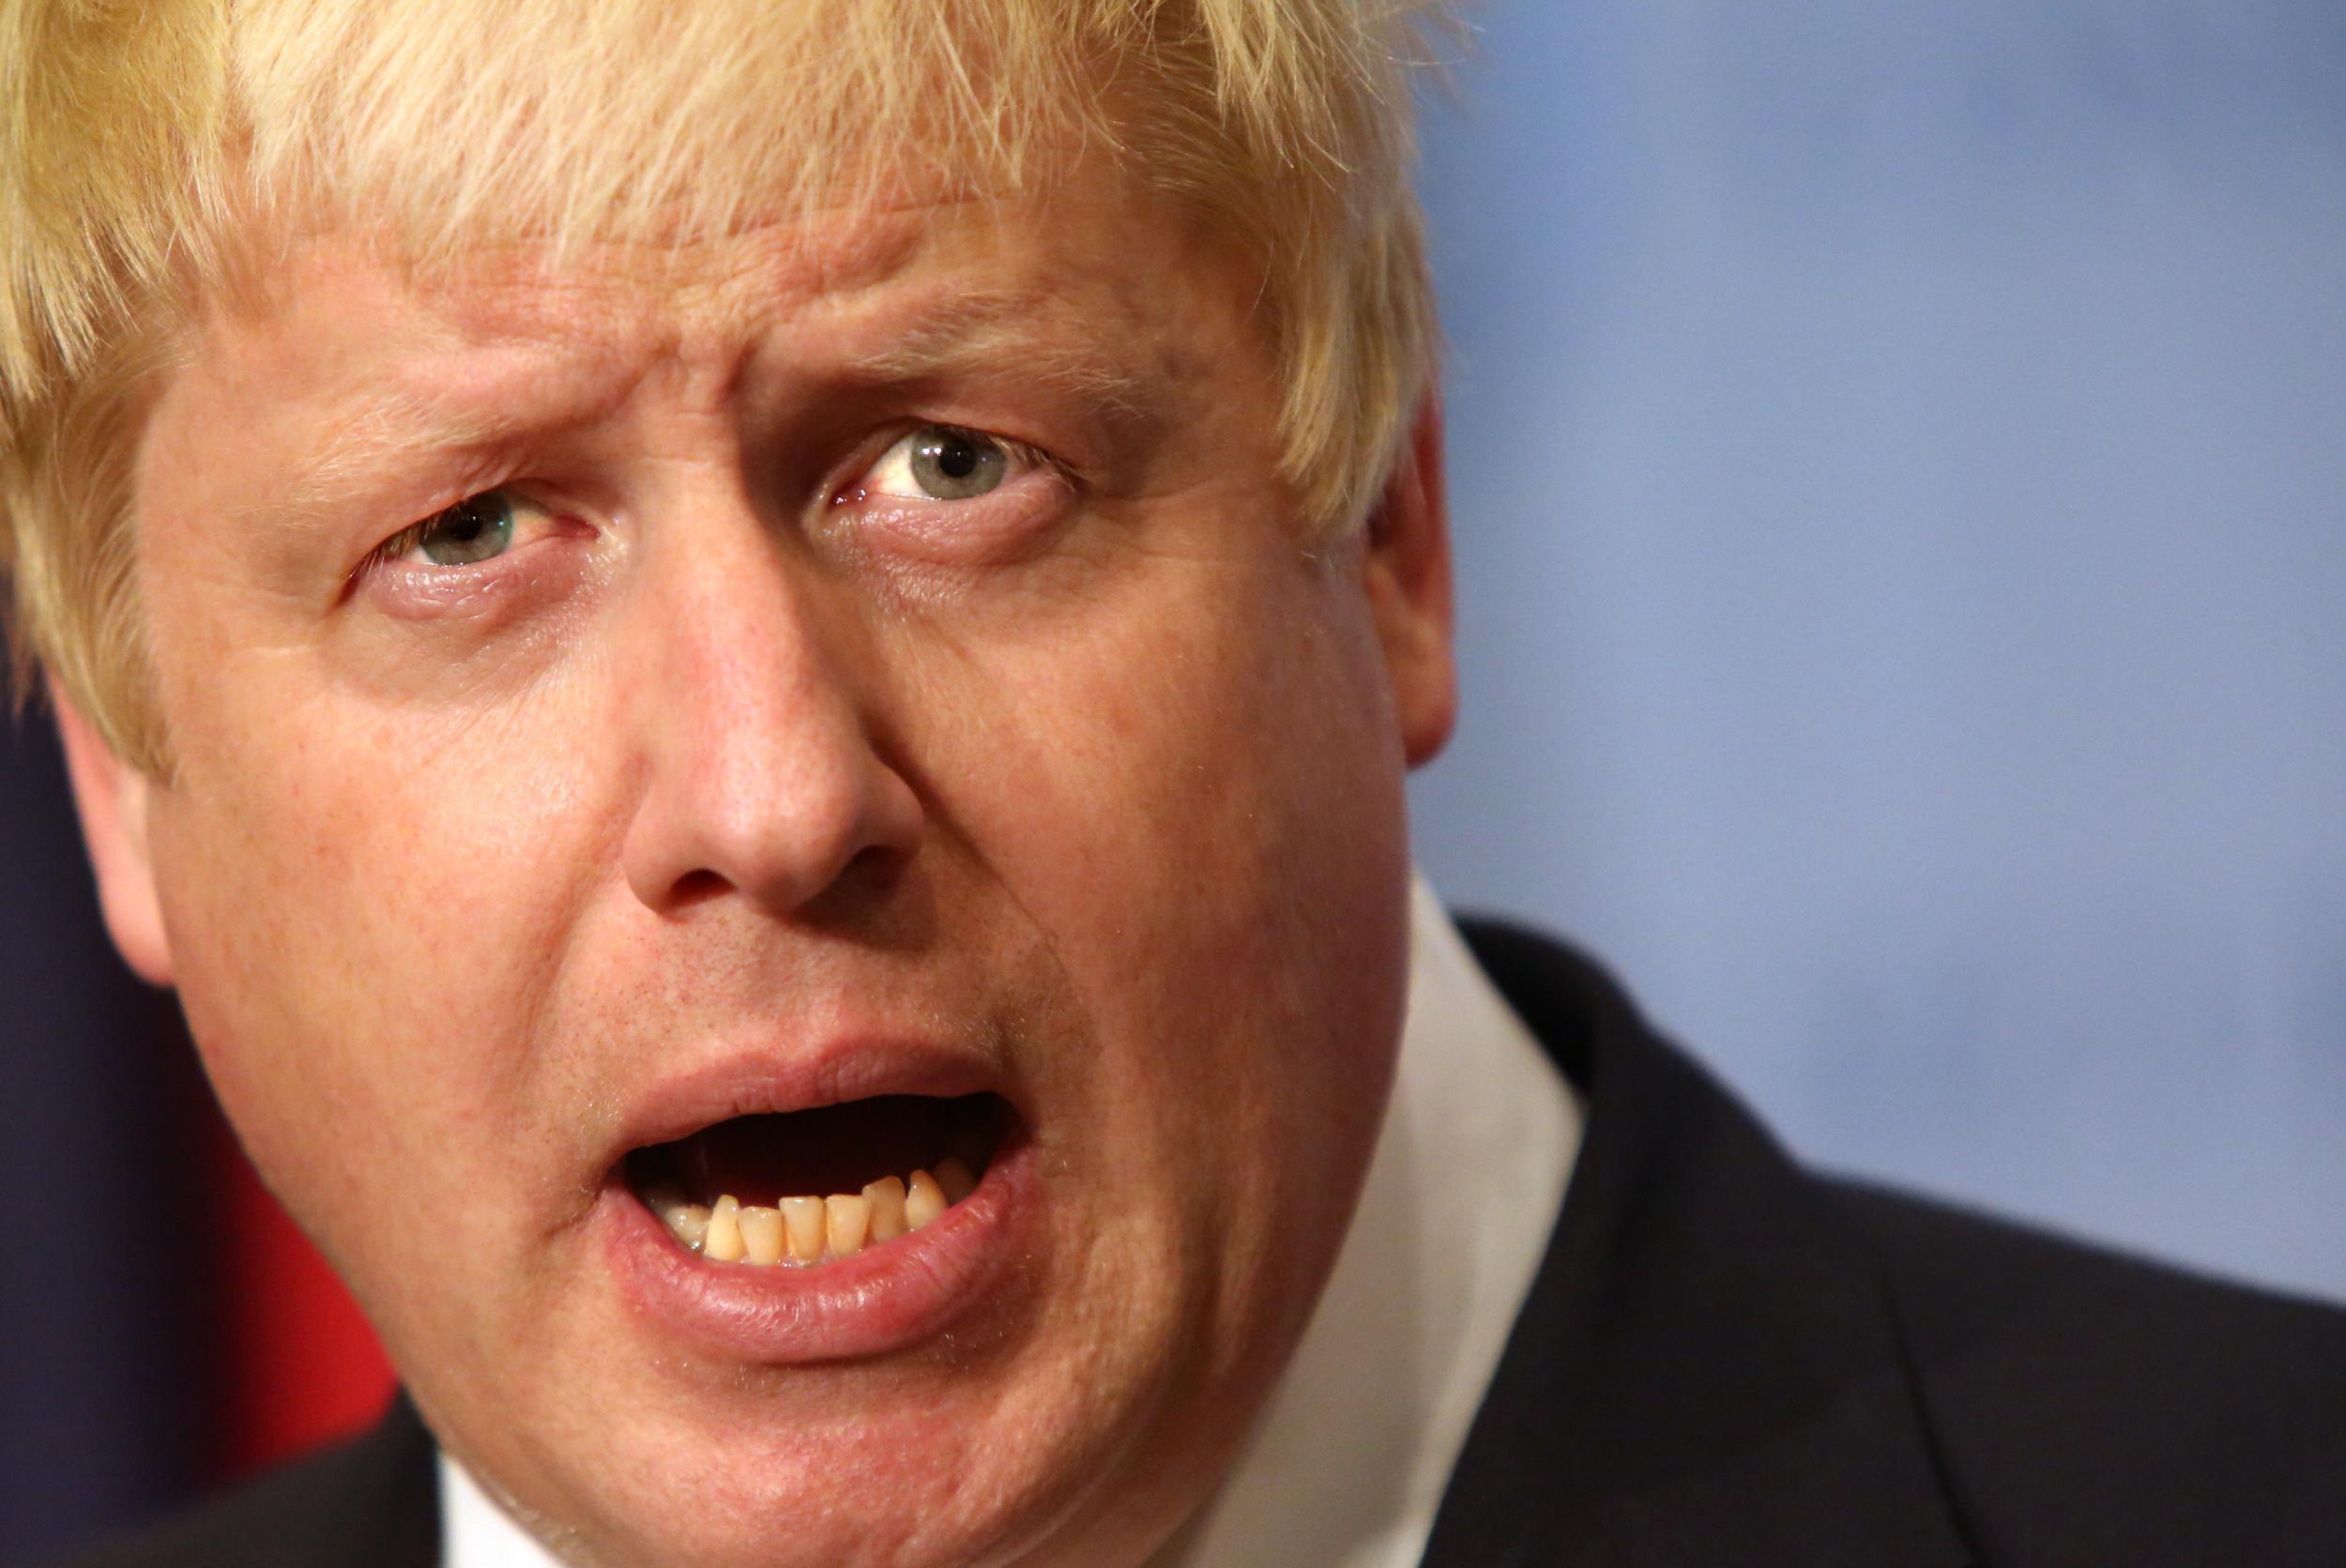 Boris Johnsonwas a leading figure in the Leave campaign